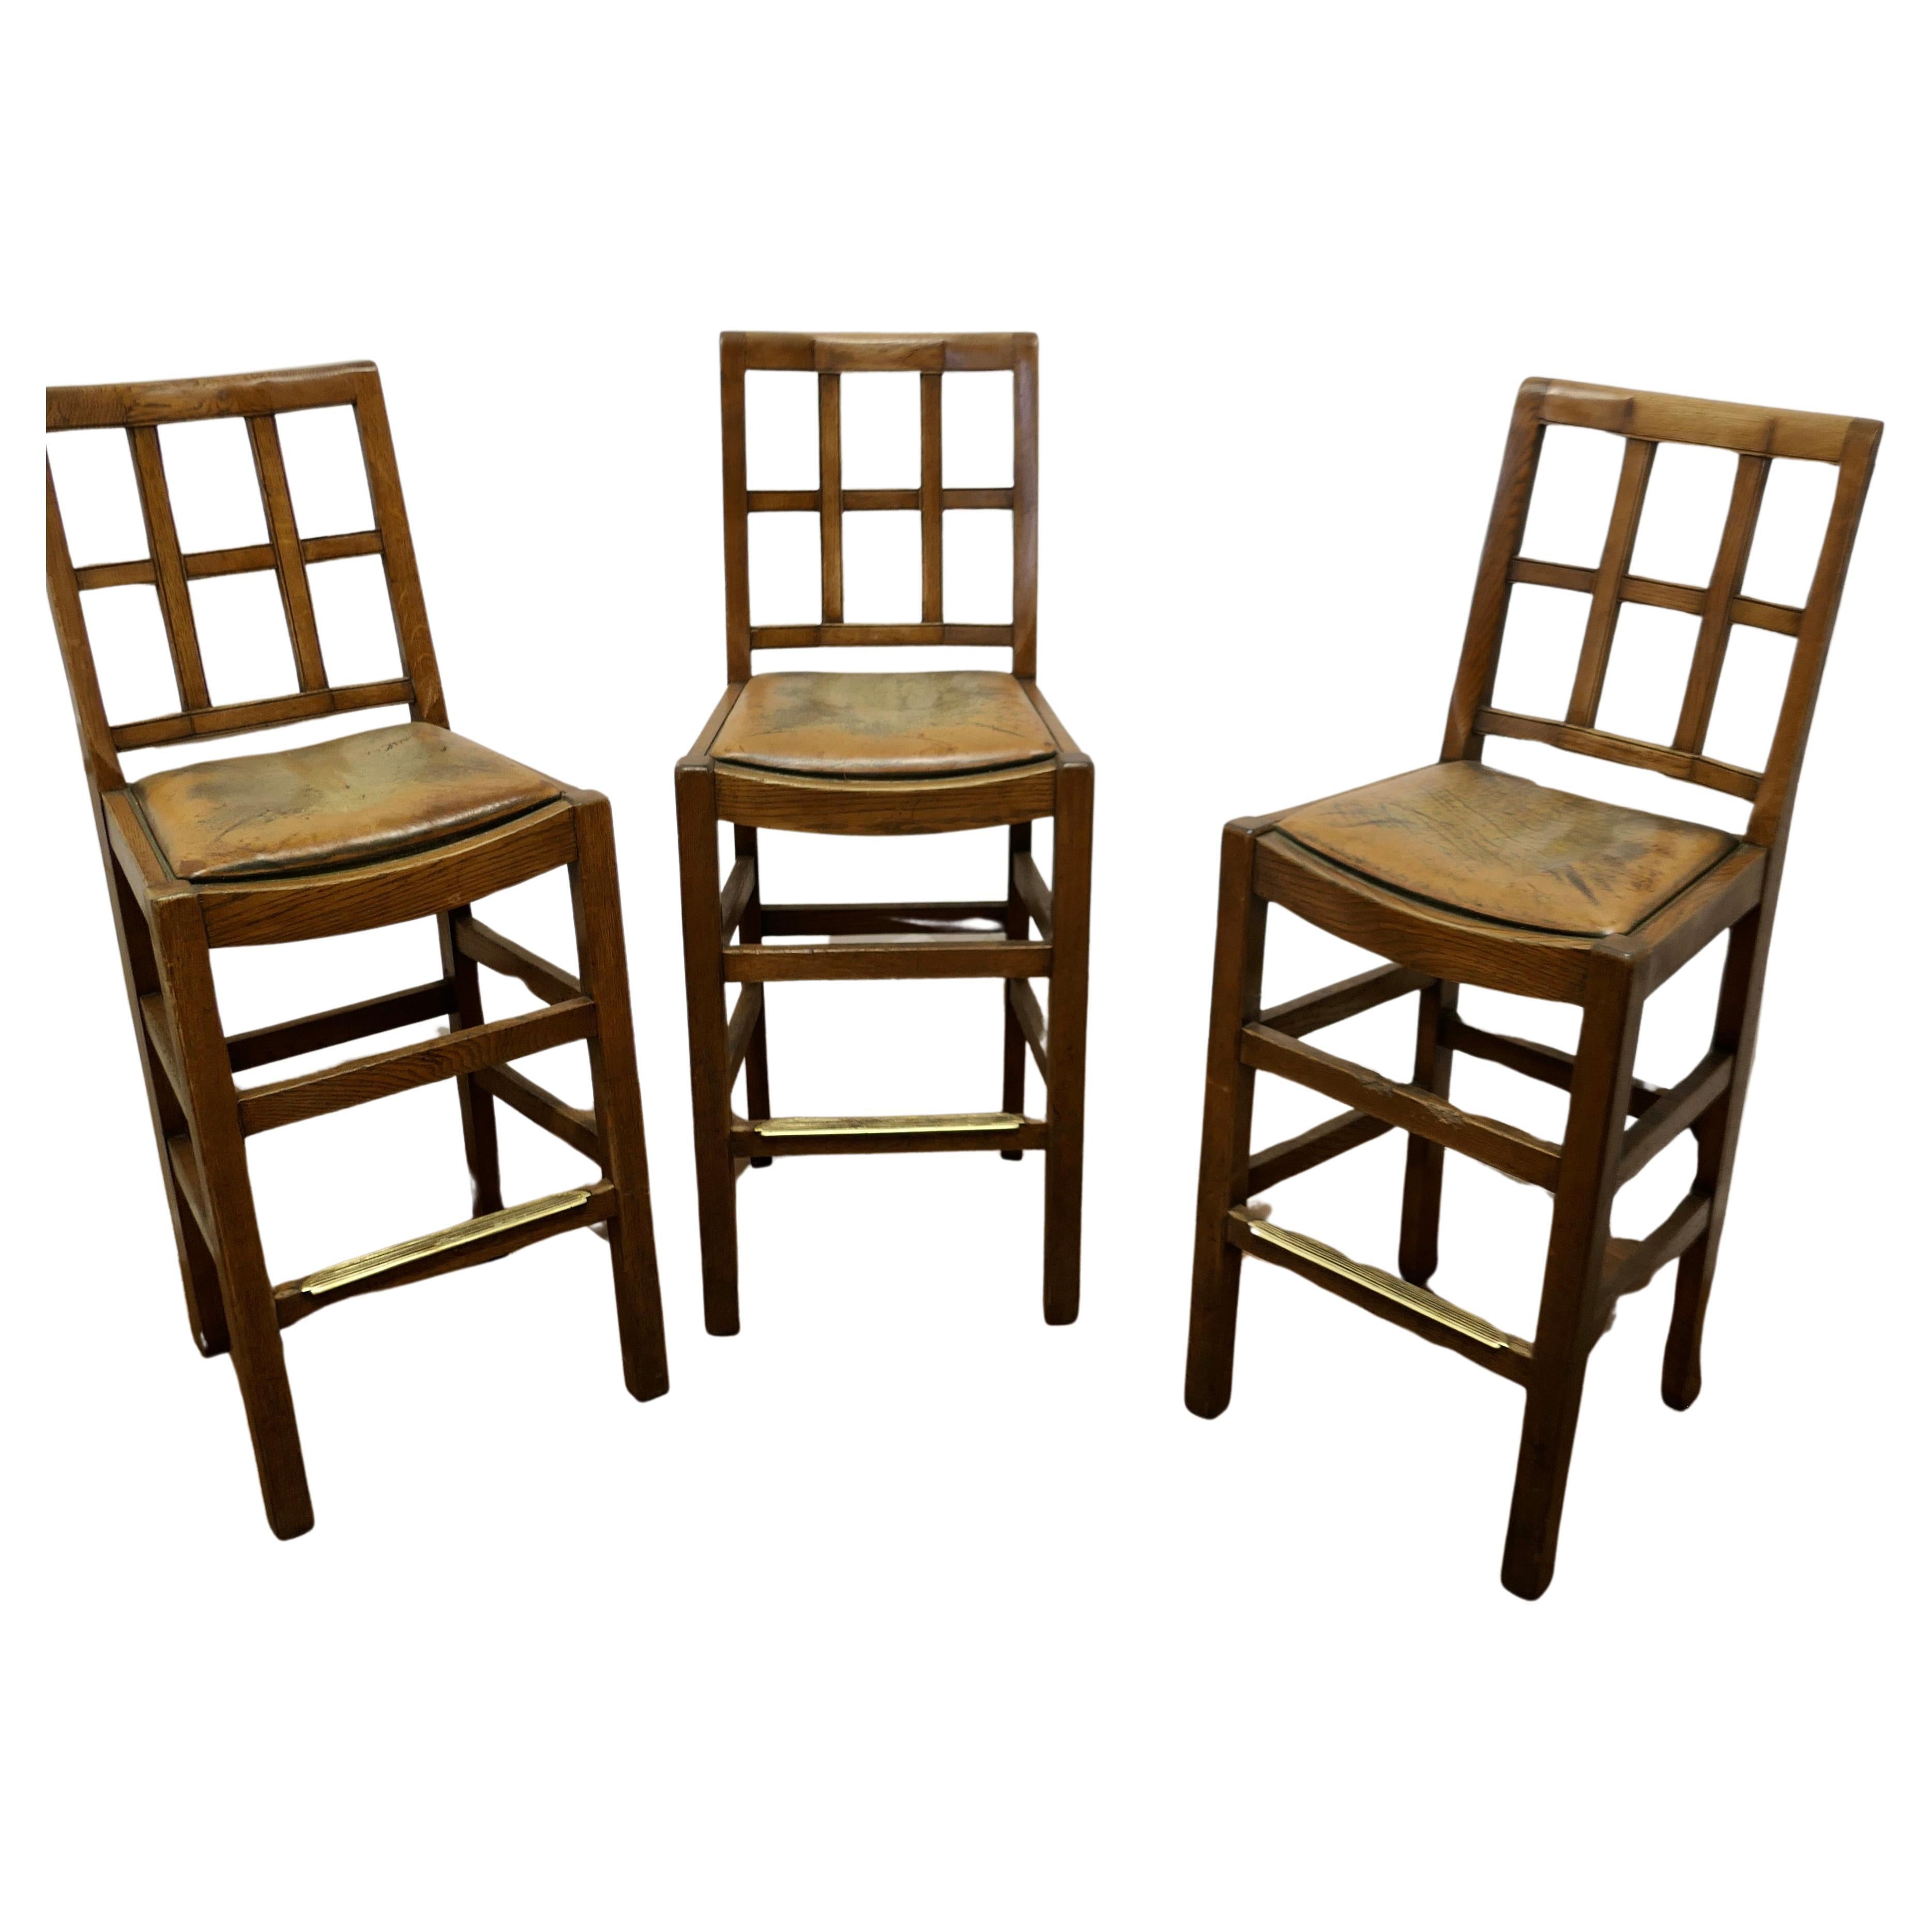 A Rare Trio of Arts and Crafts High Bar Stools, in Golden Oak   For Sale